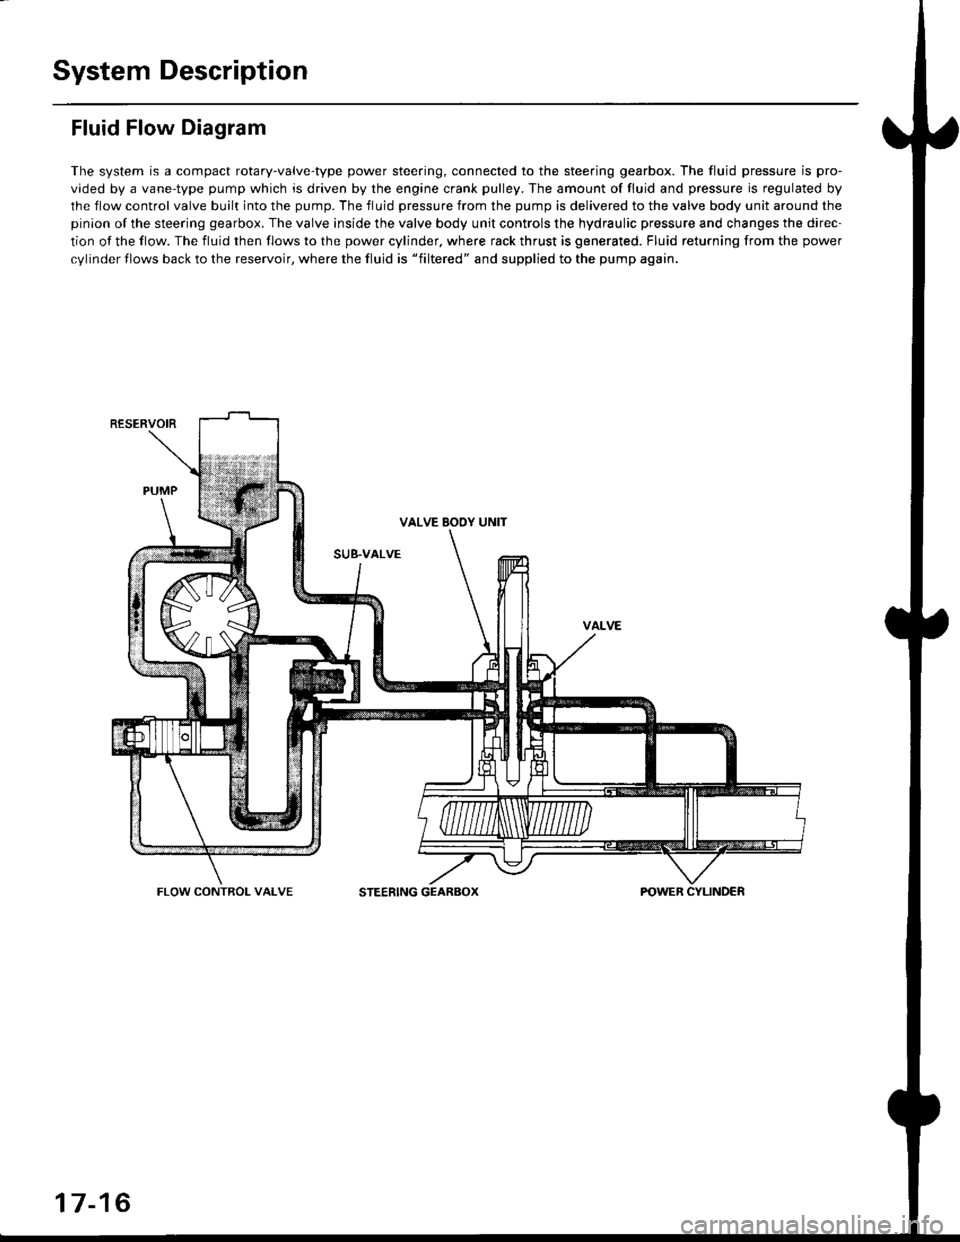 HONDA CIVIC 1996 6.G User Guide System Description
Fluid Flow Diagram
The system is a compact rotary-valve-type power steering, connected to the steering gearbox. The fluid pressure is pro-
vided by a vane-type pump which is driven 